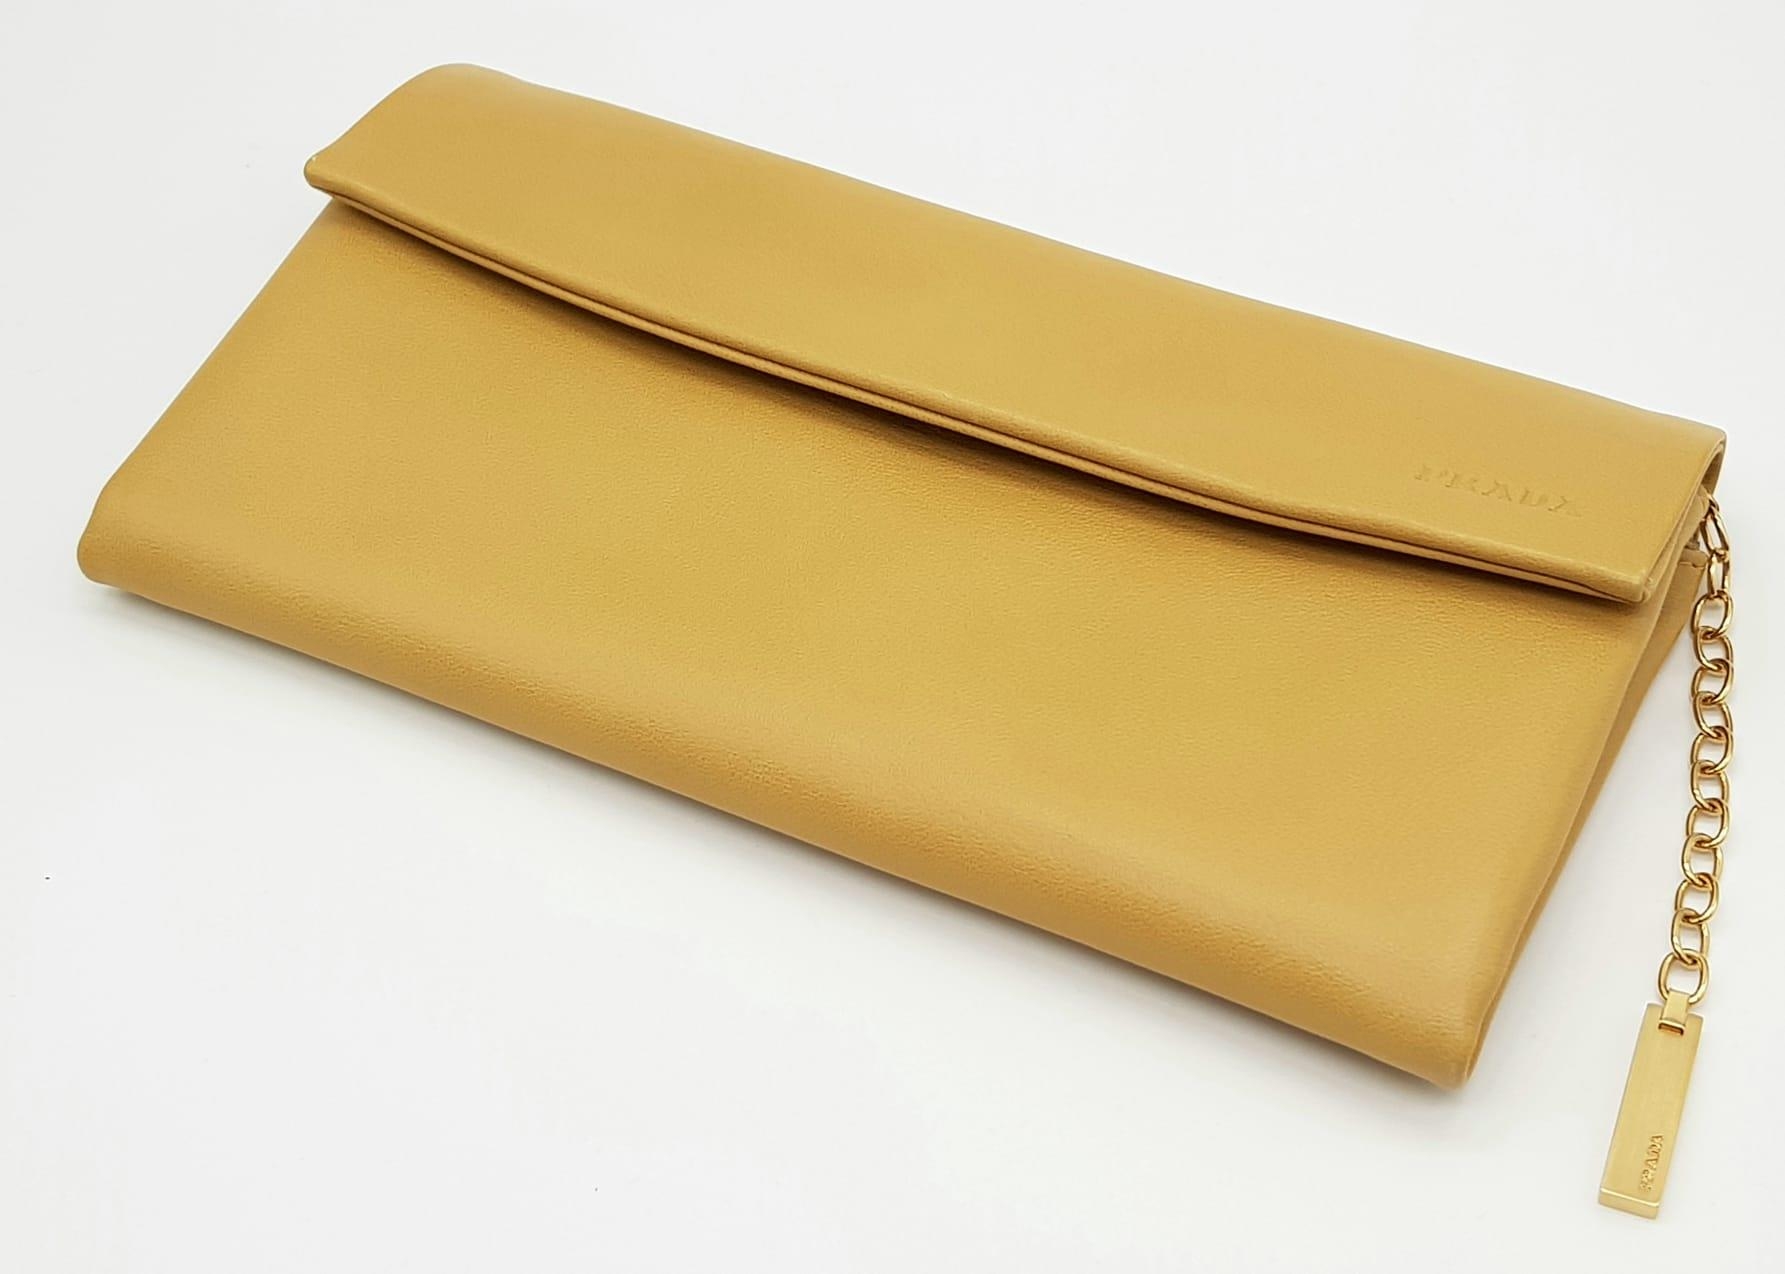 A Prada Brown Leather Clutch Bag in Box. Soft brown leather with gilded hardware. 20cm width by 11cm - Image 2 of 9